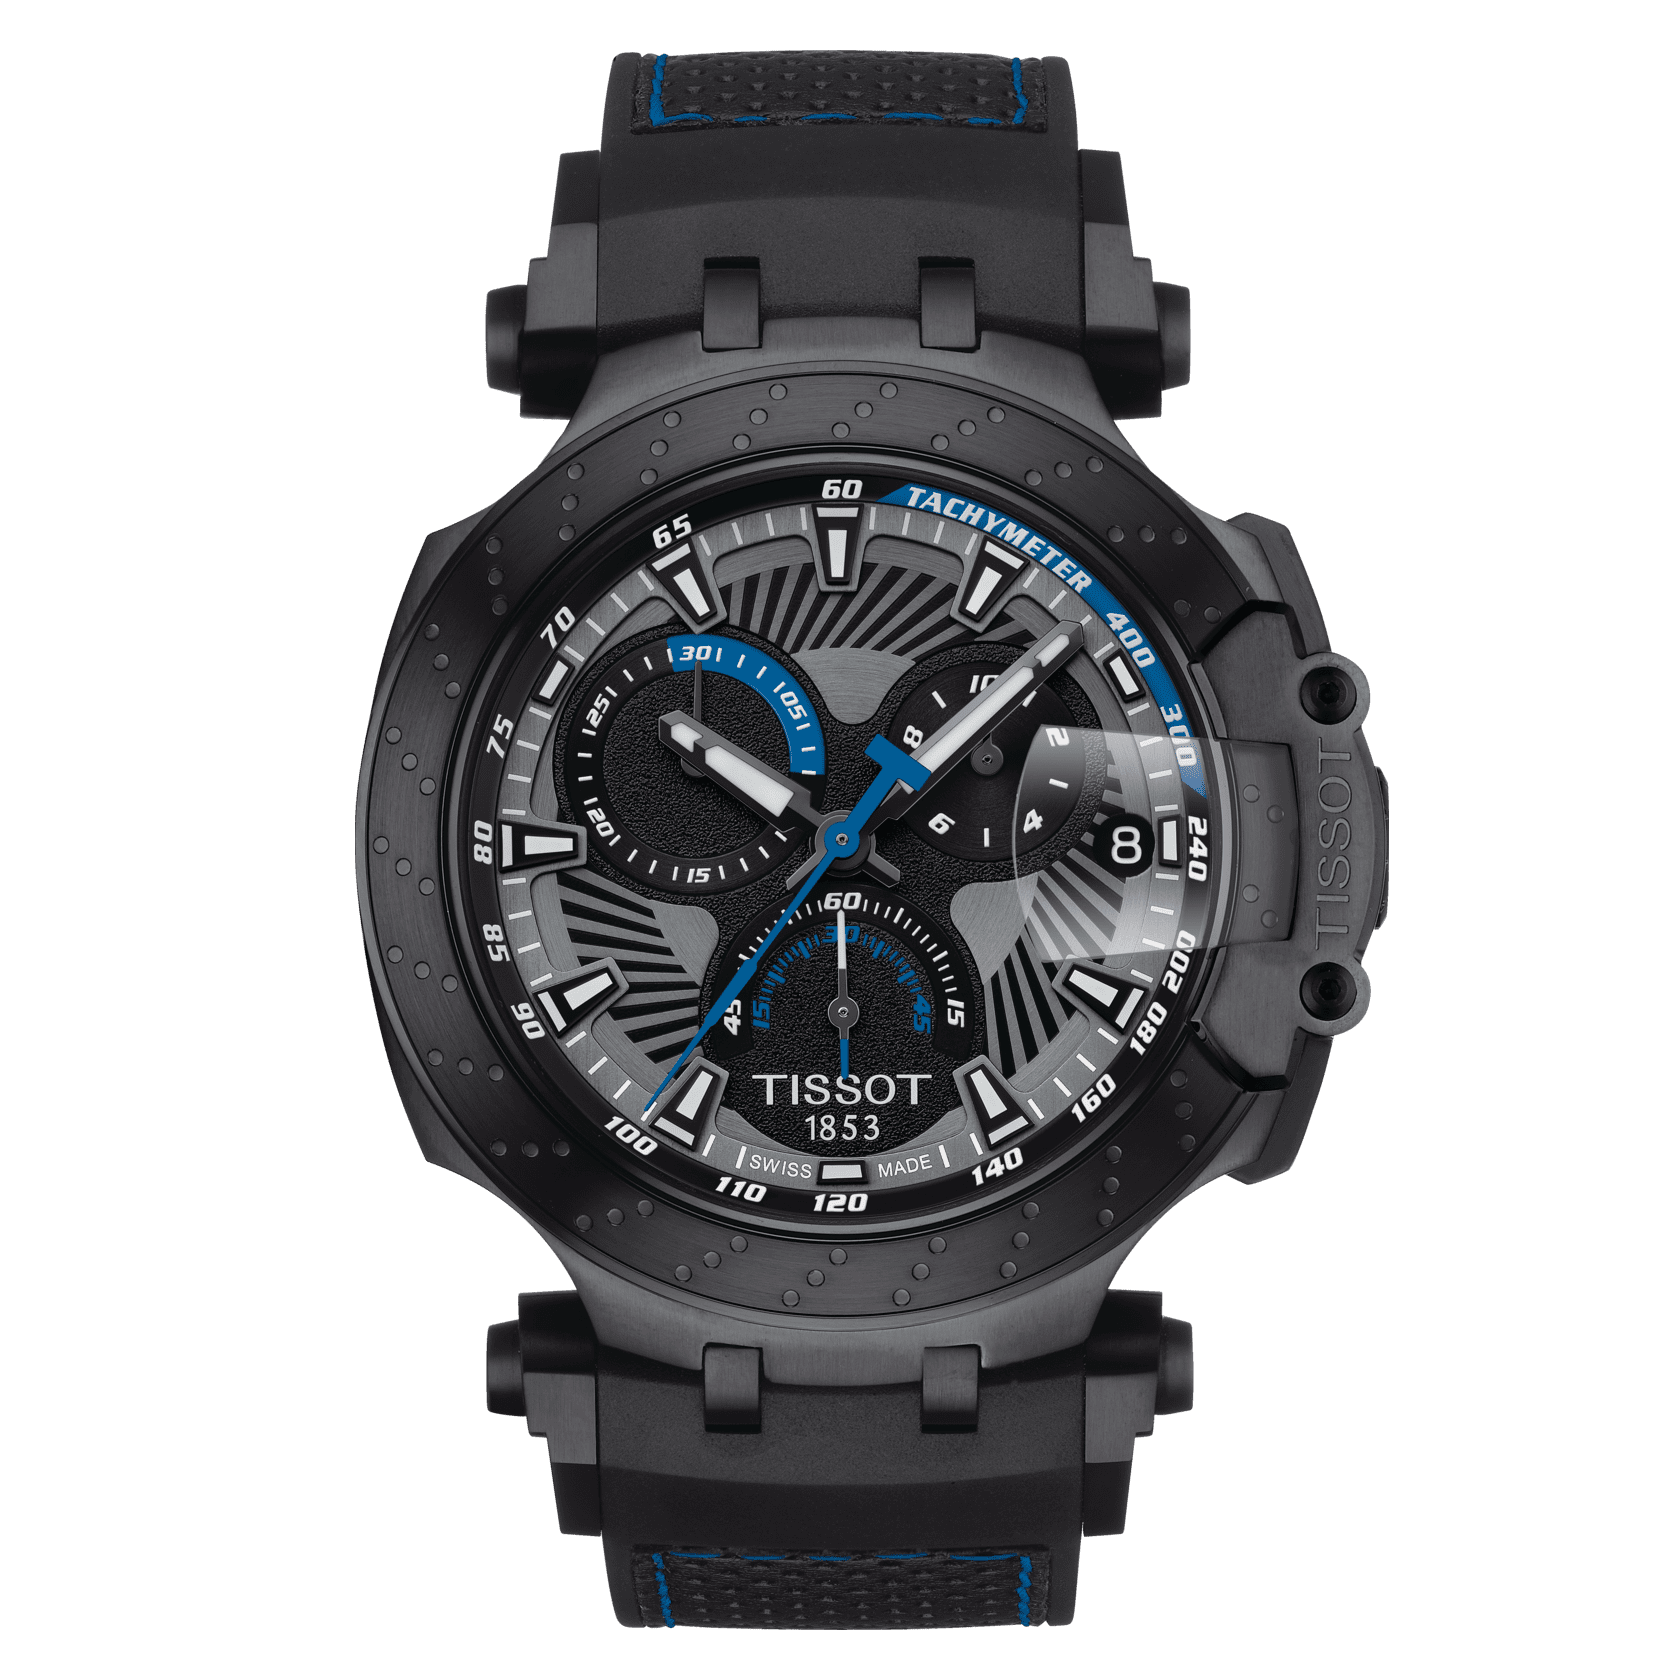 Tissot T-Race Thomas Luthi 2018 Limited Edition